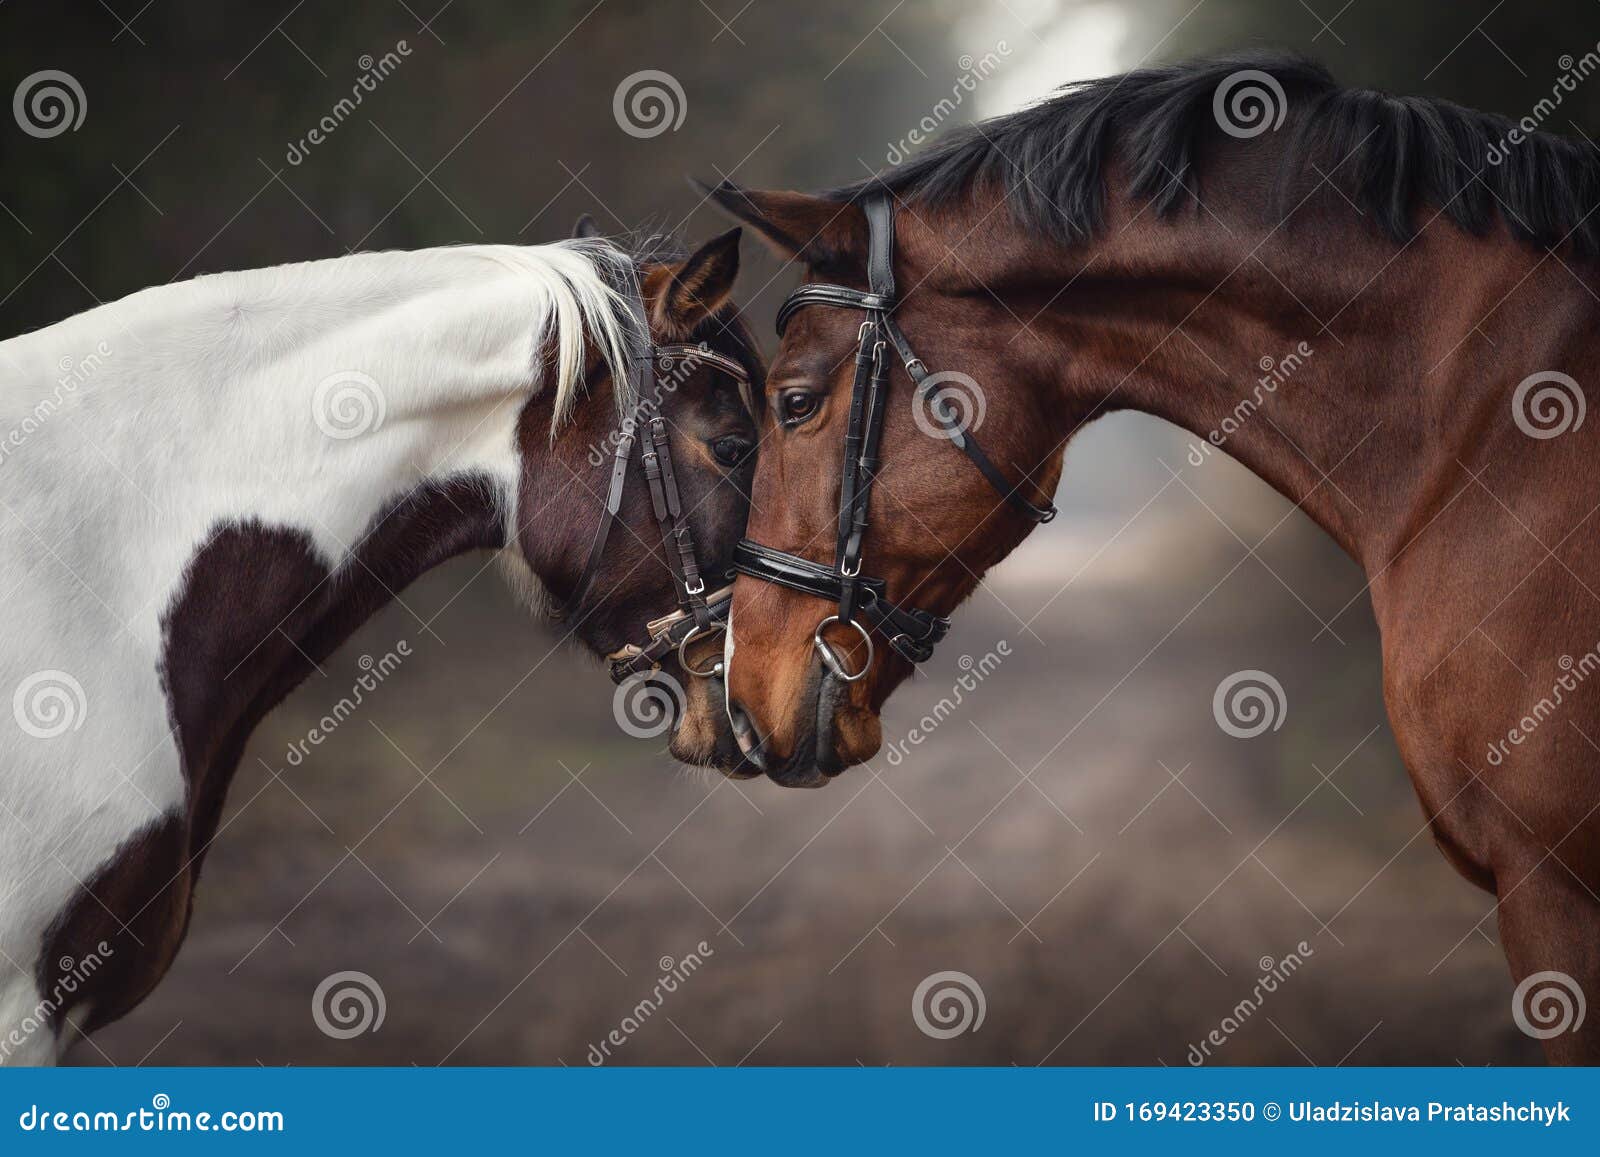 stallion and mare horses in love nose to nose sniffing each other on road in forest